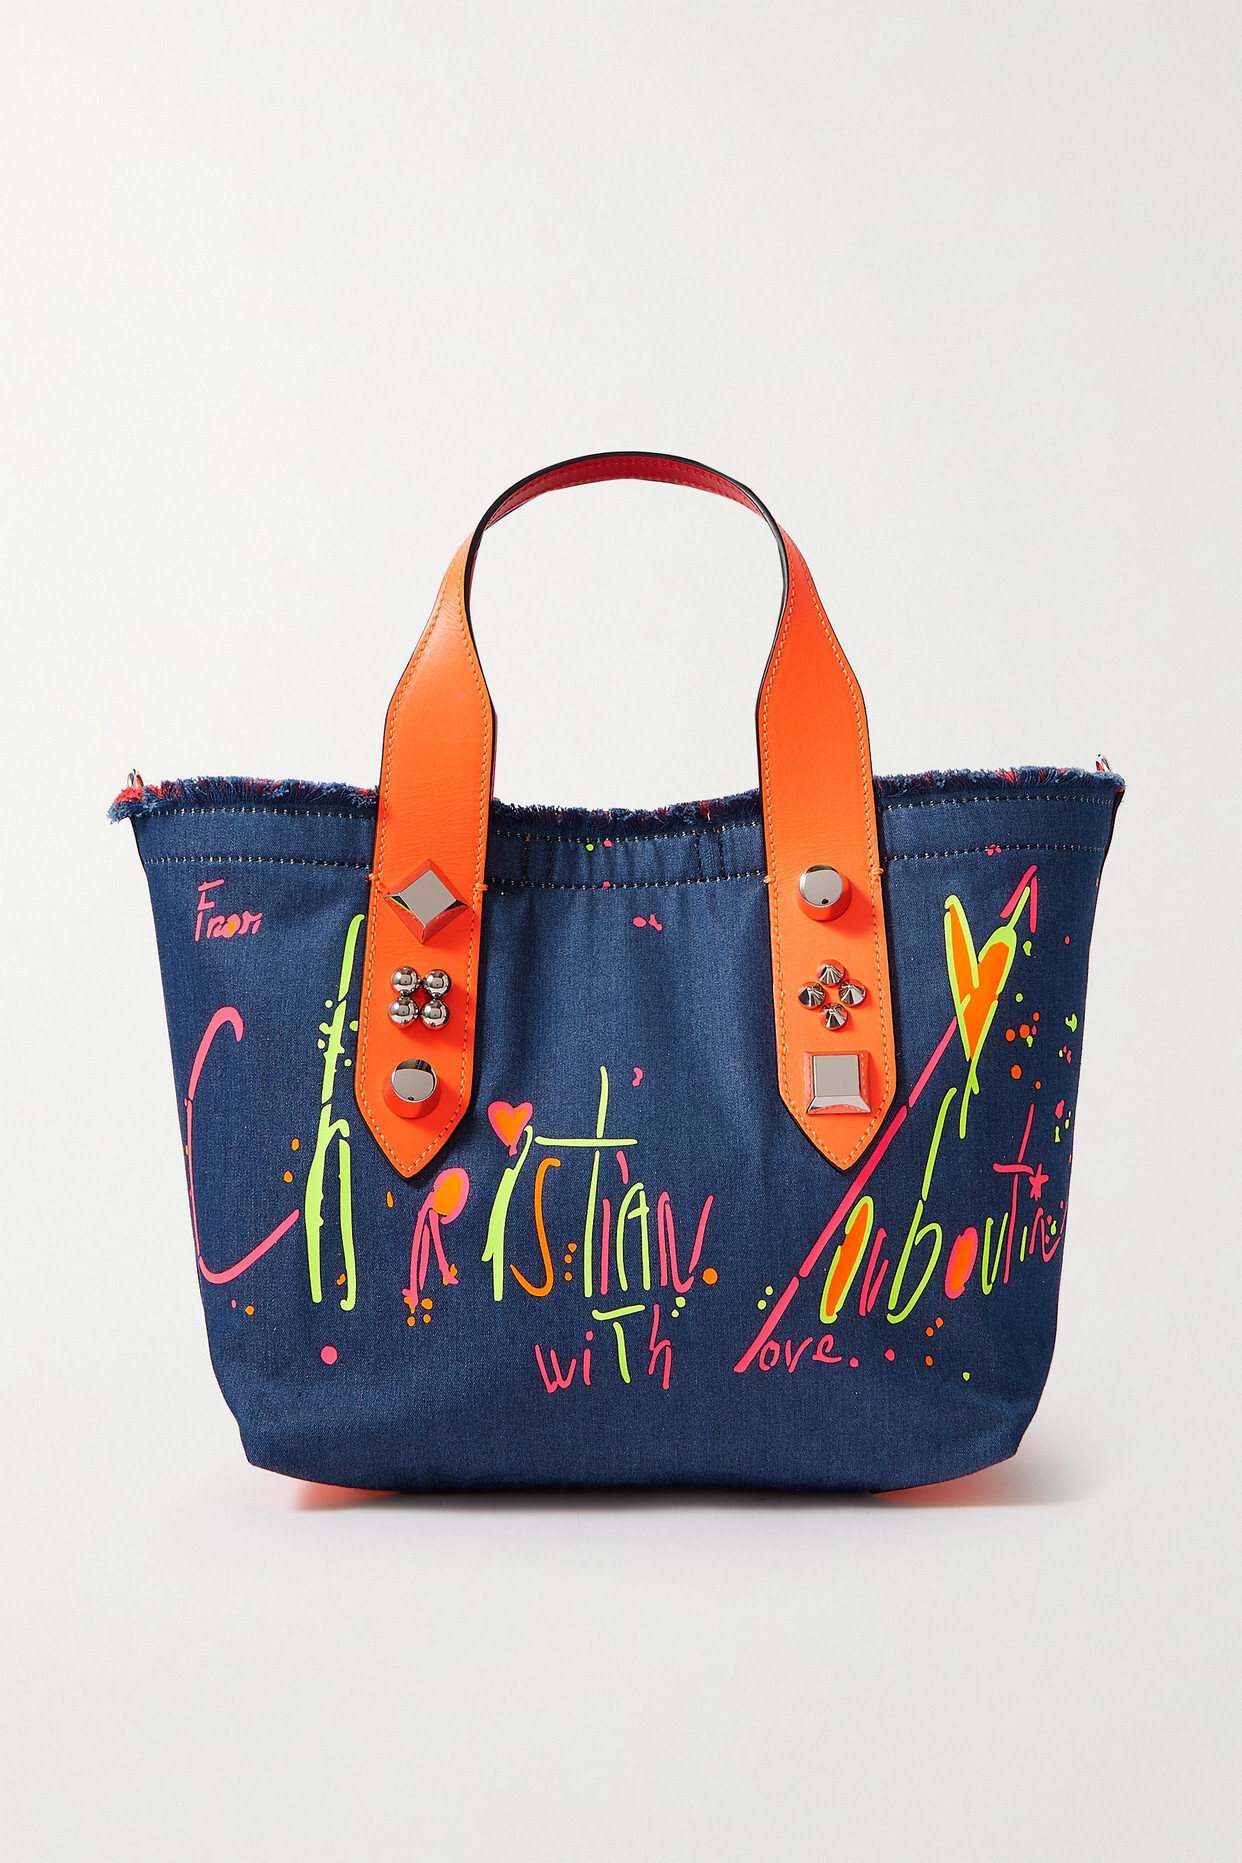 Christian Louboutin - Frangibus Small Embellished Leather-trimmed Printed Denim Tote - Blue